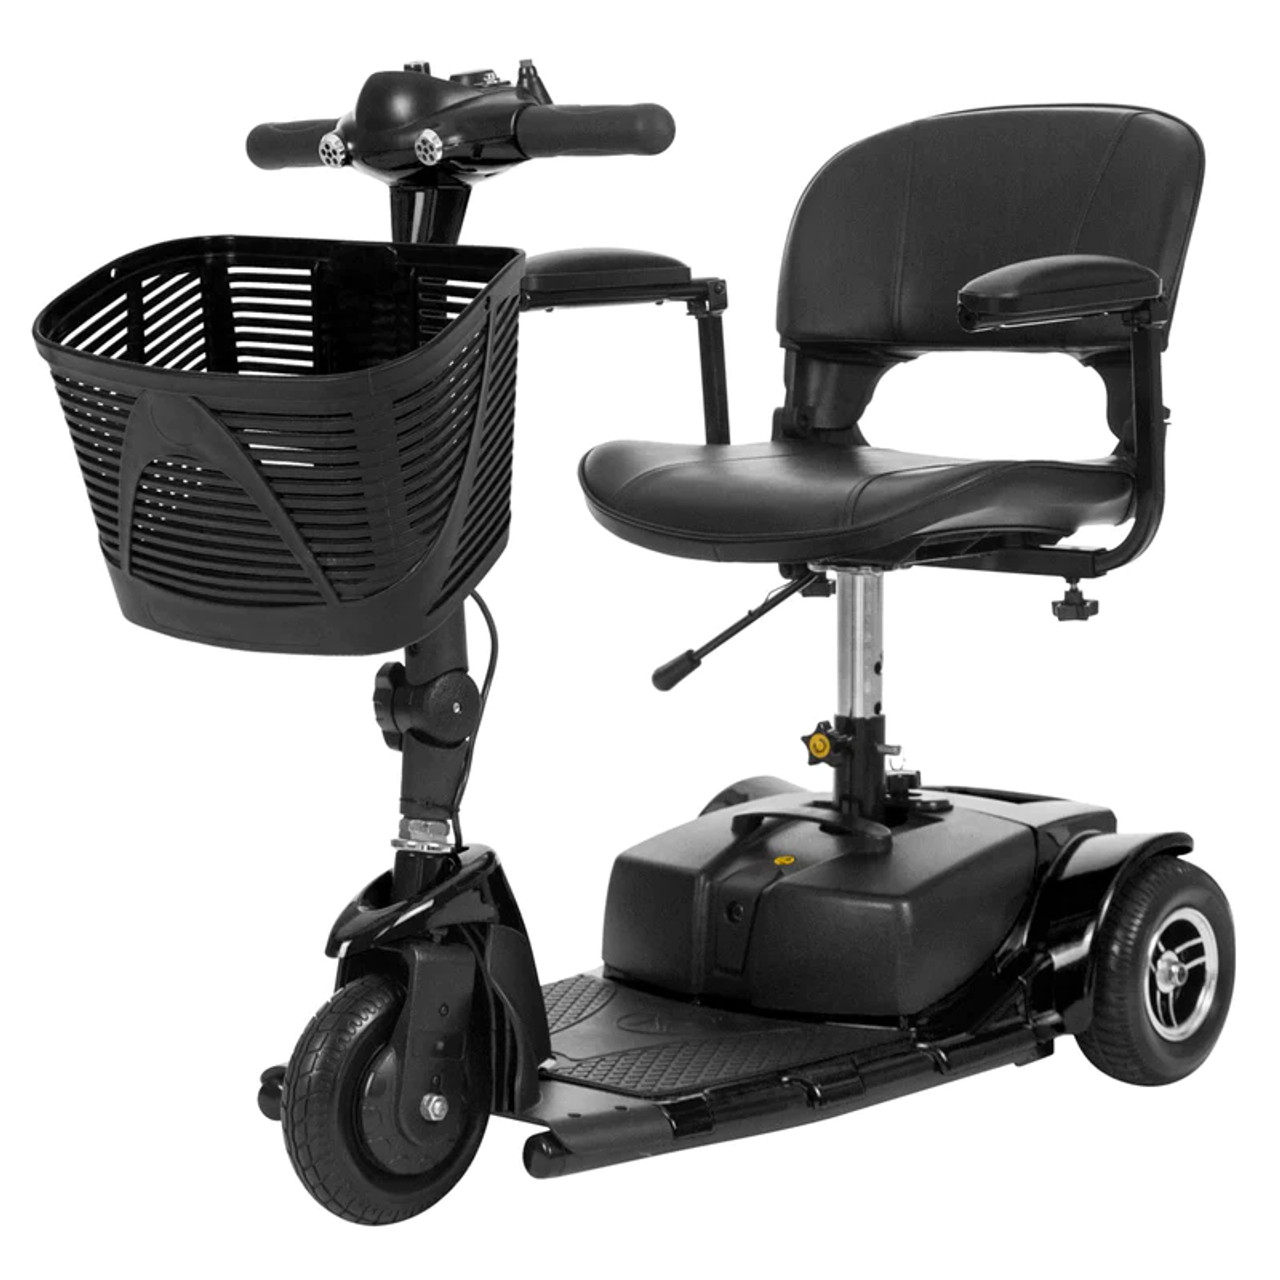 ViveHealth 3 Wheel Mobility Scooter VH EXCLUSIVE COLORS Black (Limited)